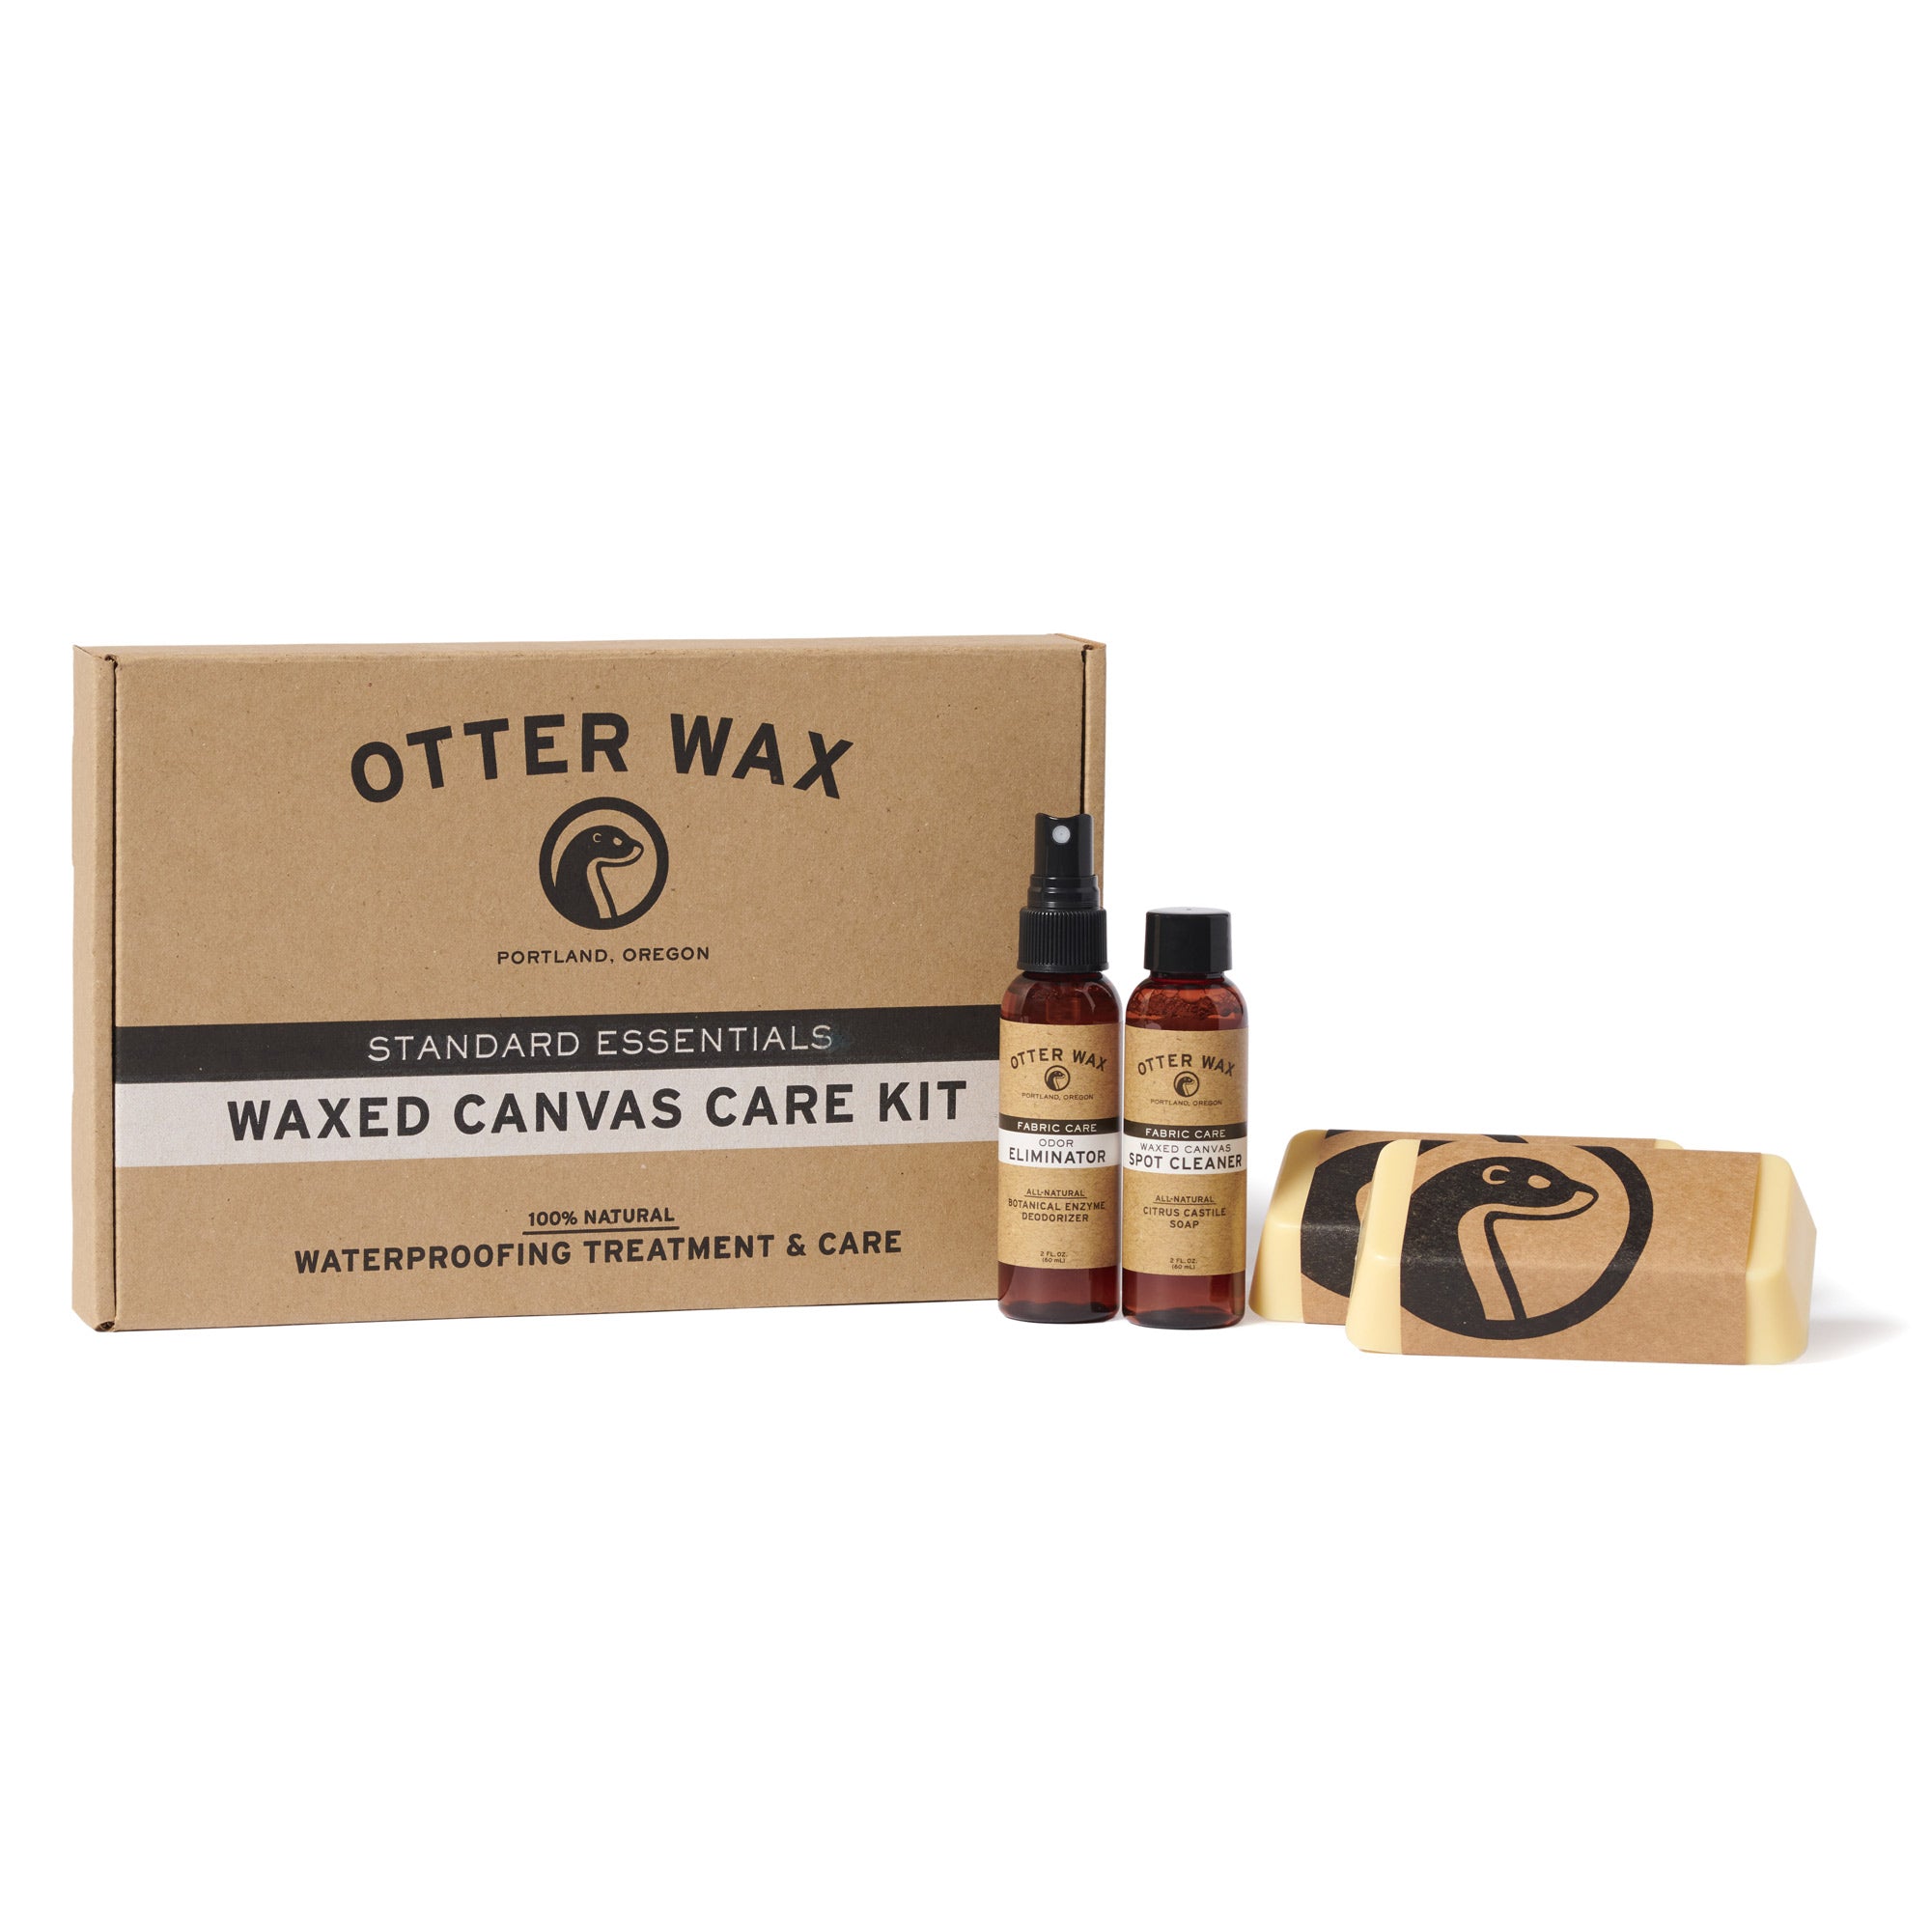 Otter Wax Waxed Canvas Care Kit Best Natural Waterproof Wax To Protect Tincloth Oilcloth And Waxed Canvas Fabrics Handmade In Portland Oregon